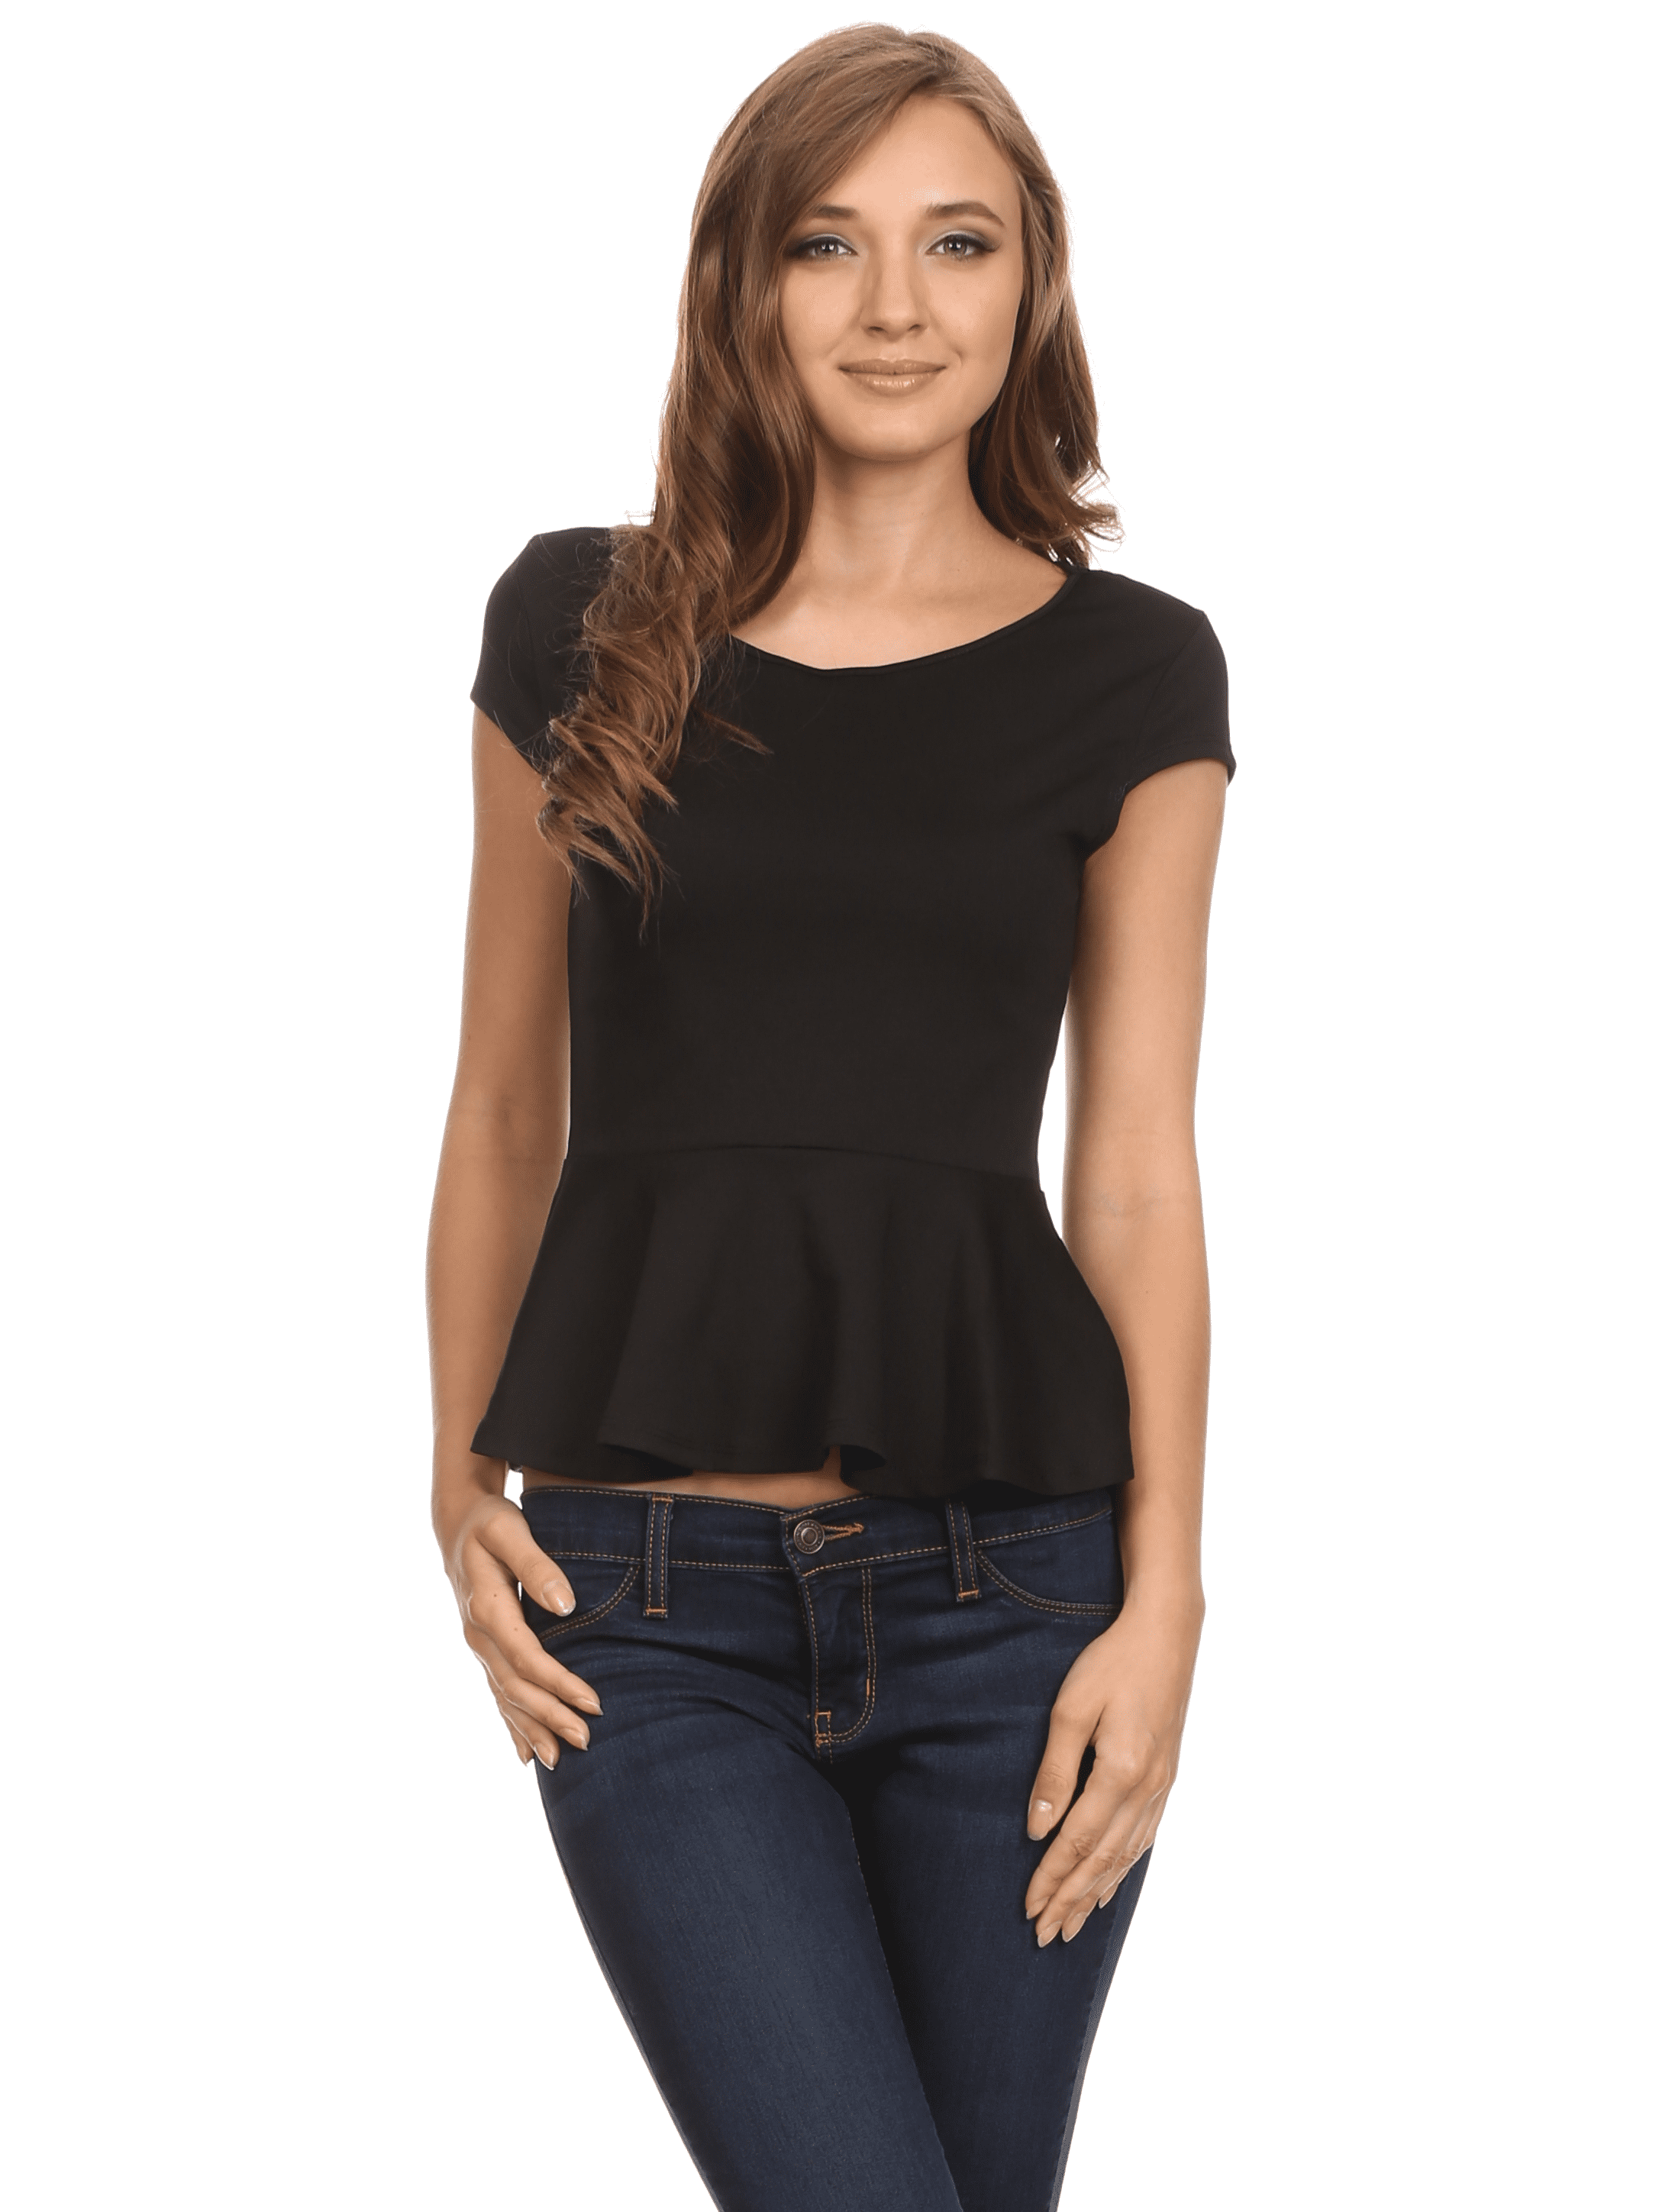 Simlu - Peplum Tops for women Short Sleeve Cotton Round Neck Fitted ...